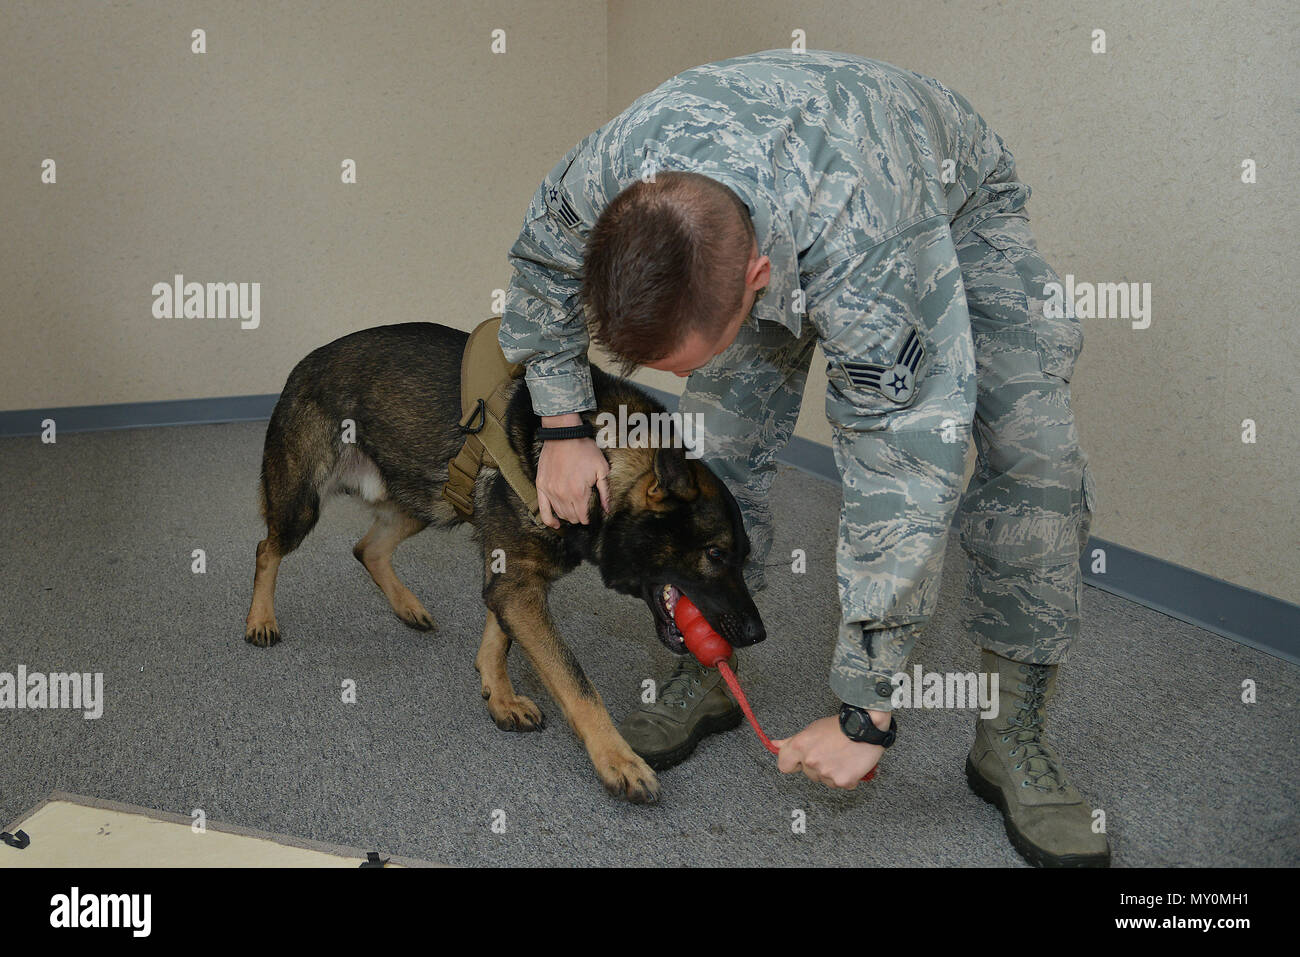 U.S. Air Force Senior Airman Benjamin Howard, 633rd Security Forces Squadron military working dog handler, rewards Rony, a 633rd SFS MWD, after finding an explosive training aid at Joint Base Langley-Eustis, Va., Nov. 29, 2016. During the training, the canine and handler search rooms to find simulated explosive threats to prepare for real-world incidences. (U.S. Air Force photo by Airman 1st Class Tristan Biese) Stock Photo